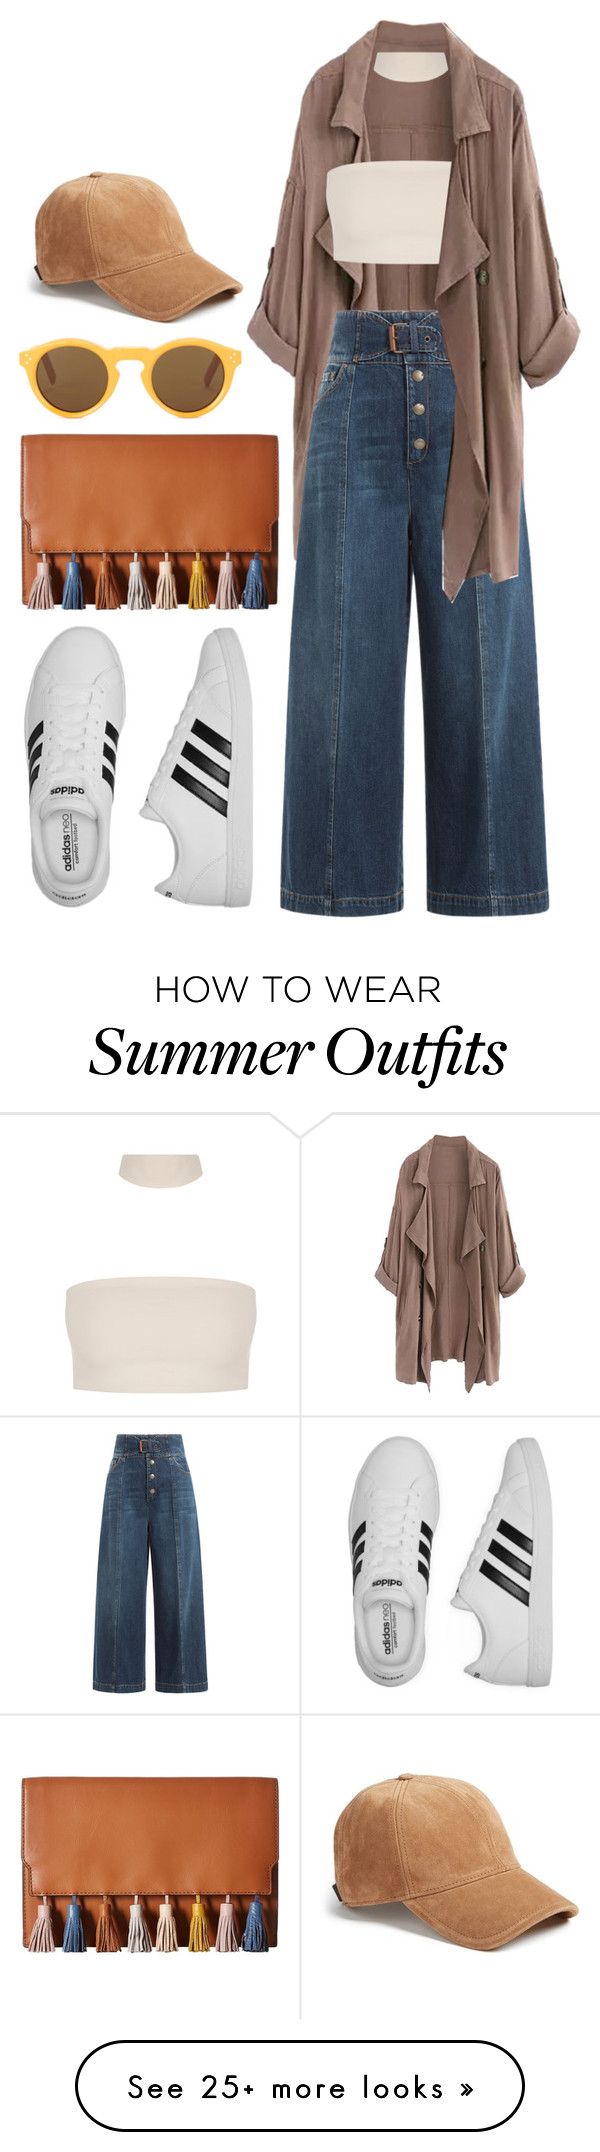 "Transition" by pstm on Polyvore featuring RED Valentino, adidas, Rebe...